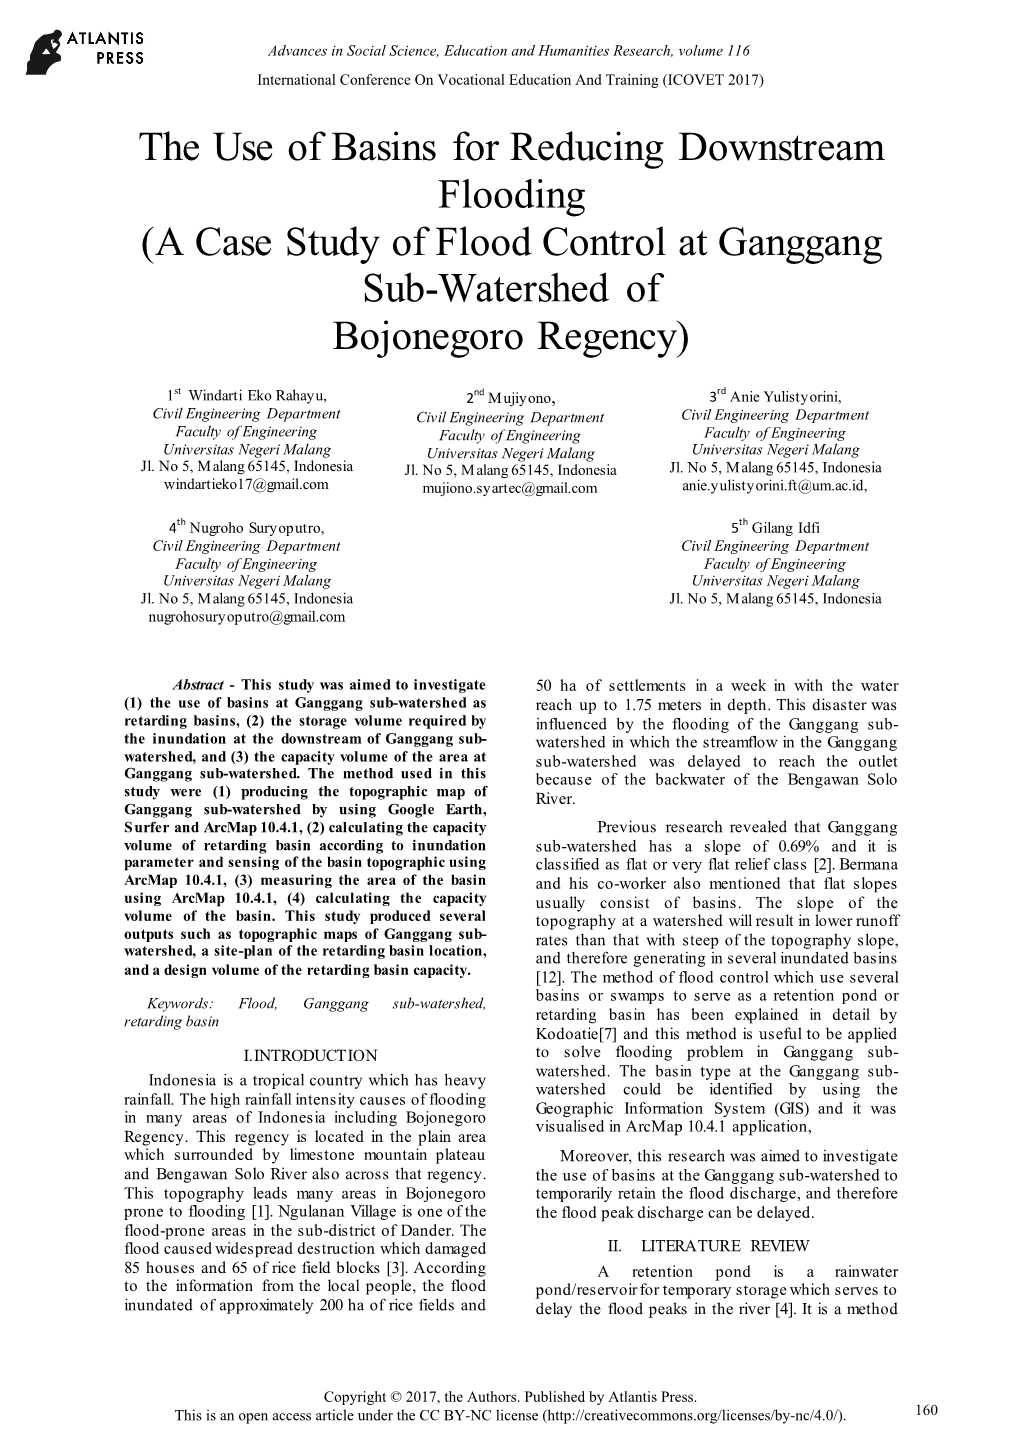 The Use of Basins for Reducing Downstream Flooding (A Case Study of Flood Control at Ganggang Sub-Watershed of Bojonegoro Regency)